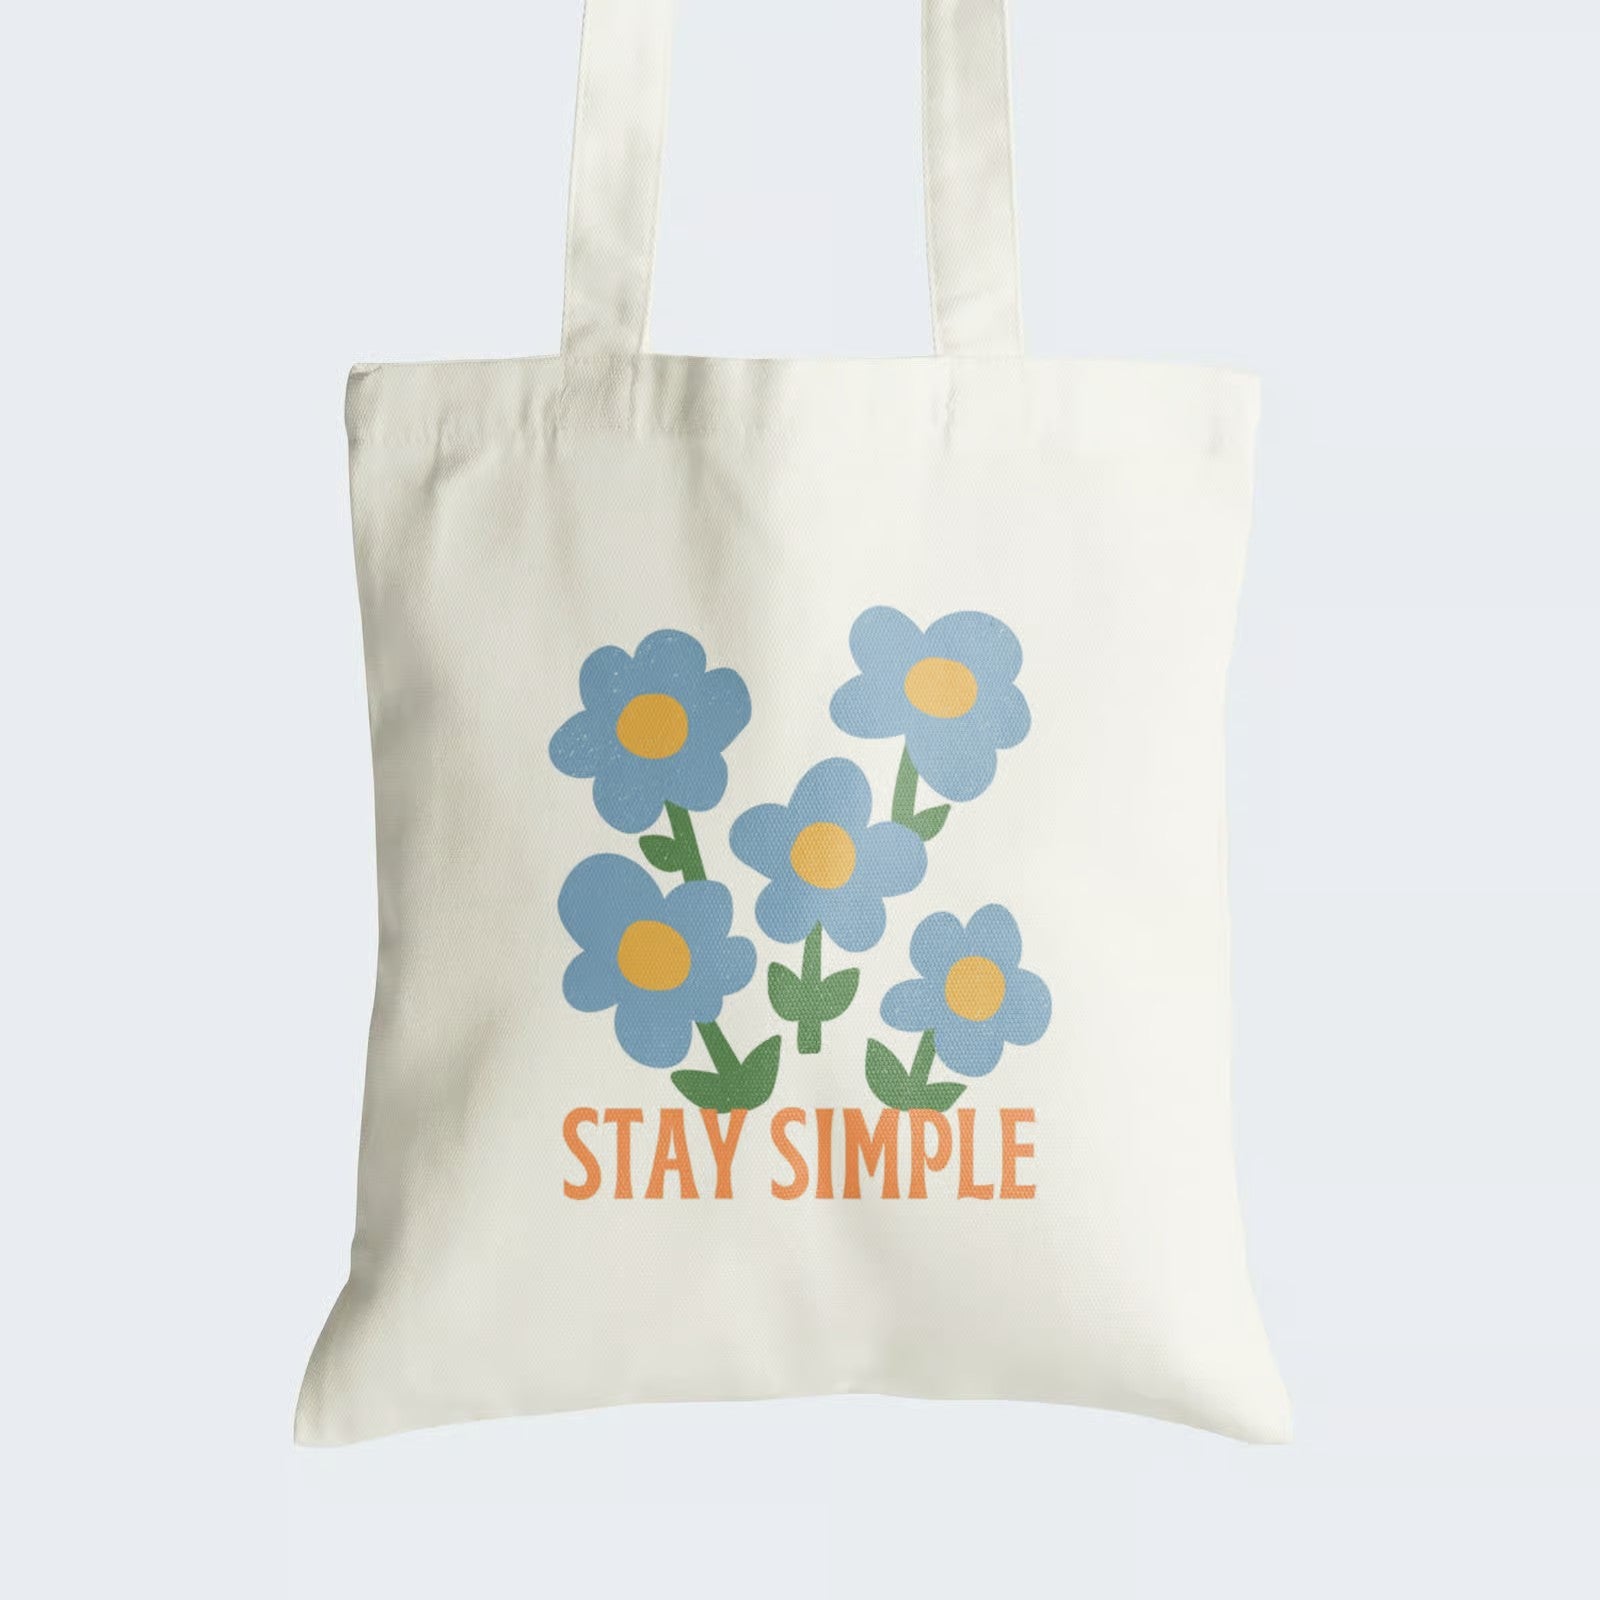 Elevate your style with our "Stay Simple" Cotton Canvas Tote Bag, an ode to the beauty of simplicity. This tote features a graphic design of five delicate blue flowers, symbolizing natural elegance, along with the caption "Stay Simple." Crafted for durability and style, it includes a secure zipper closure for daily convenience. Carry the message of uncomplicated charm and the allure of simplicity with our stylish Cotton Canvas Tote Bag. Order yours today and embrace the grace of simplicity!